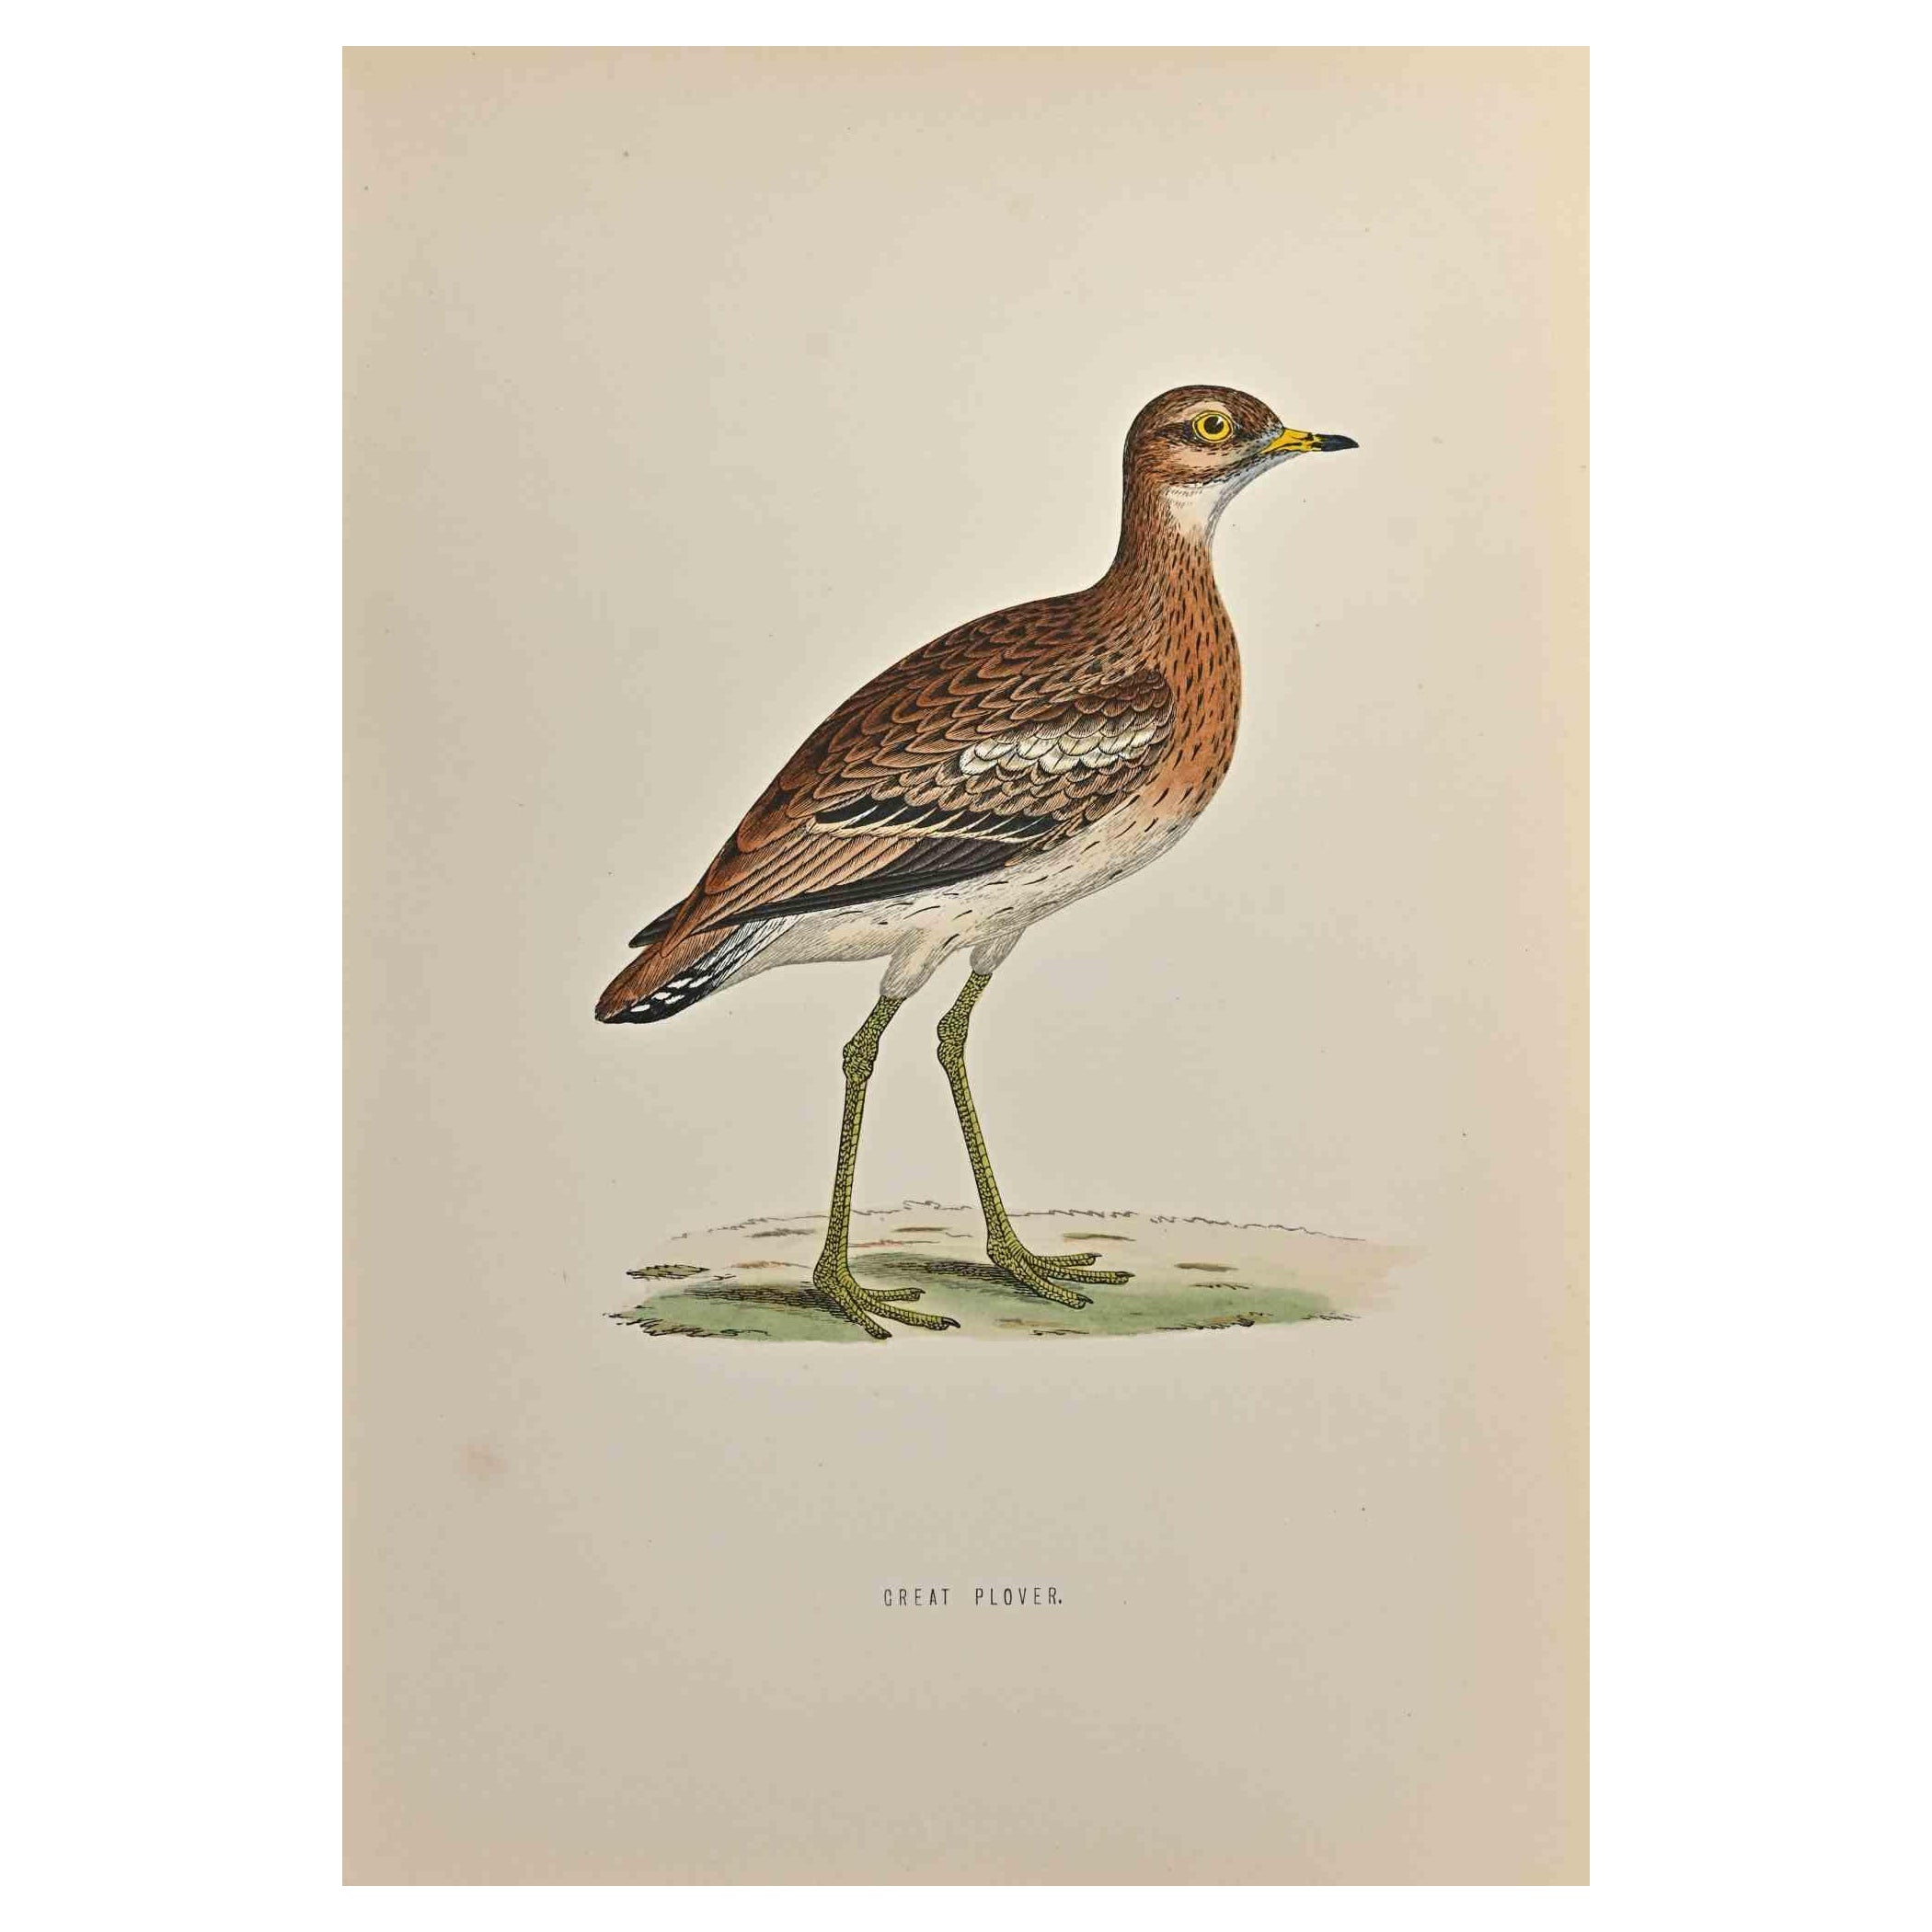 Great Plover  is a modern artwork realized in 1870 by the British artist Alexander Francis Lydon (1836-1917) . 

Woodcut print, hand colored, published by London, Bell & Sons, 1870.  Name of the bird printed in plate. This work is part of a print